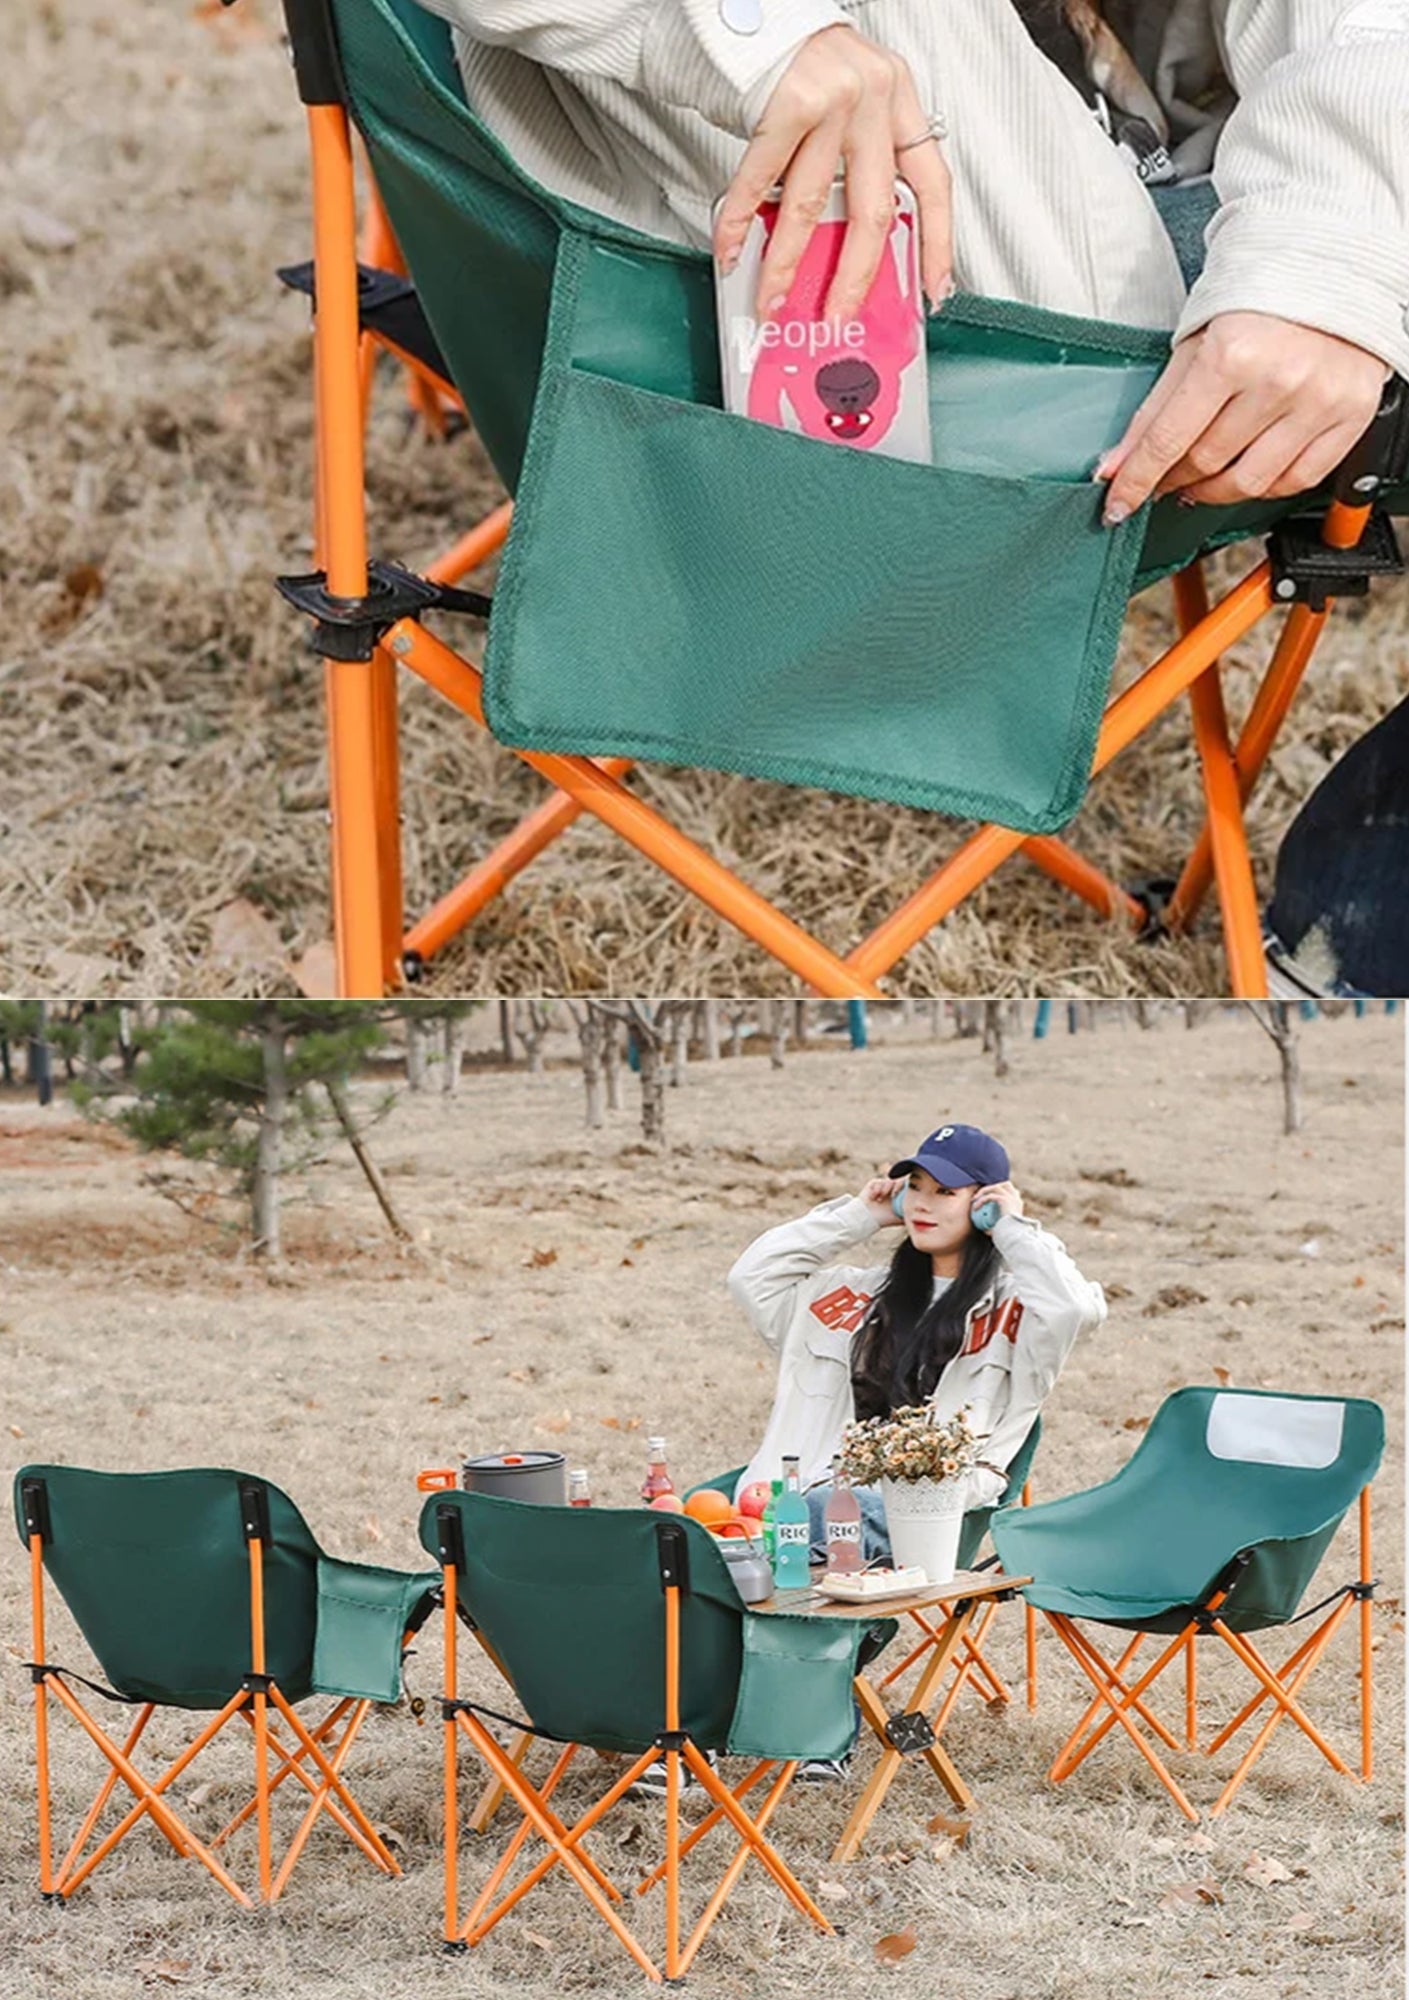 Half Moon Metal Frame Folding Camping Chair with Side & Back Pocket